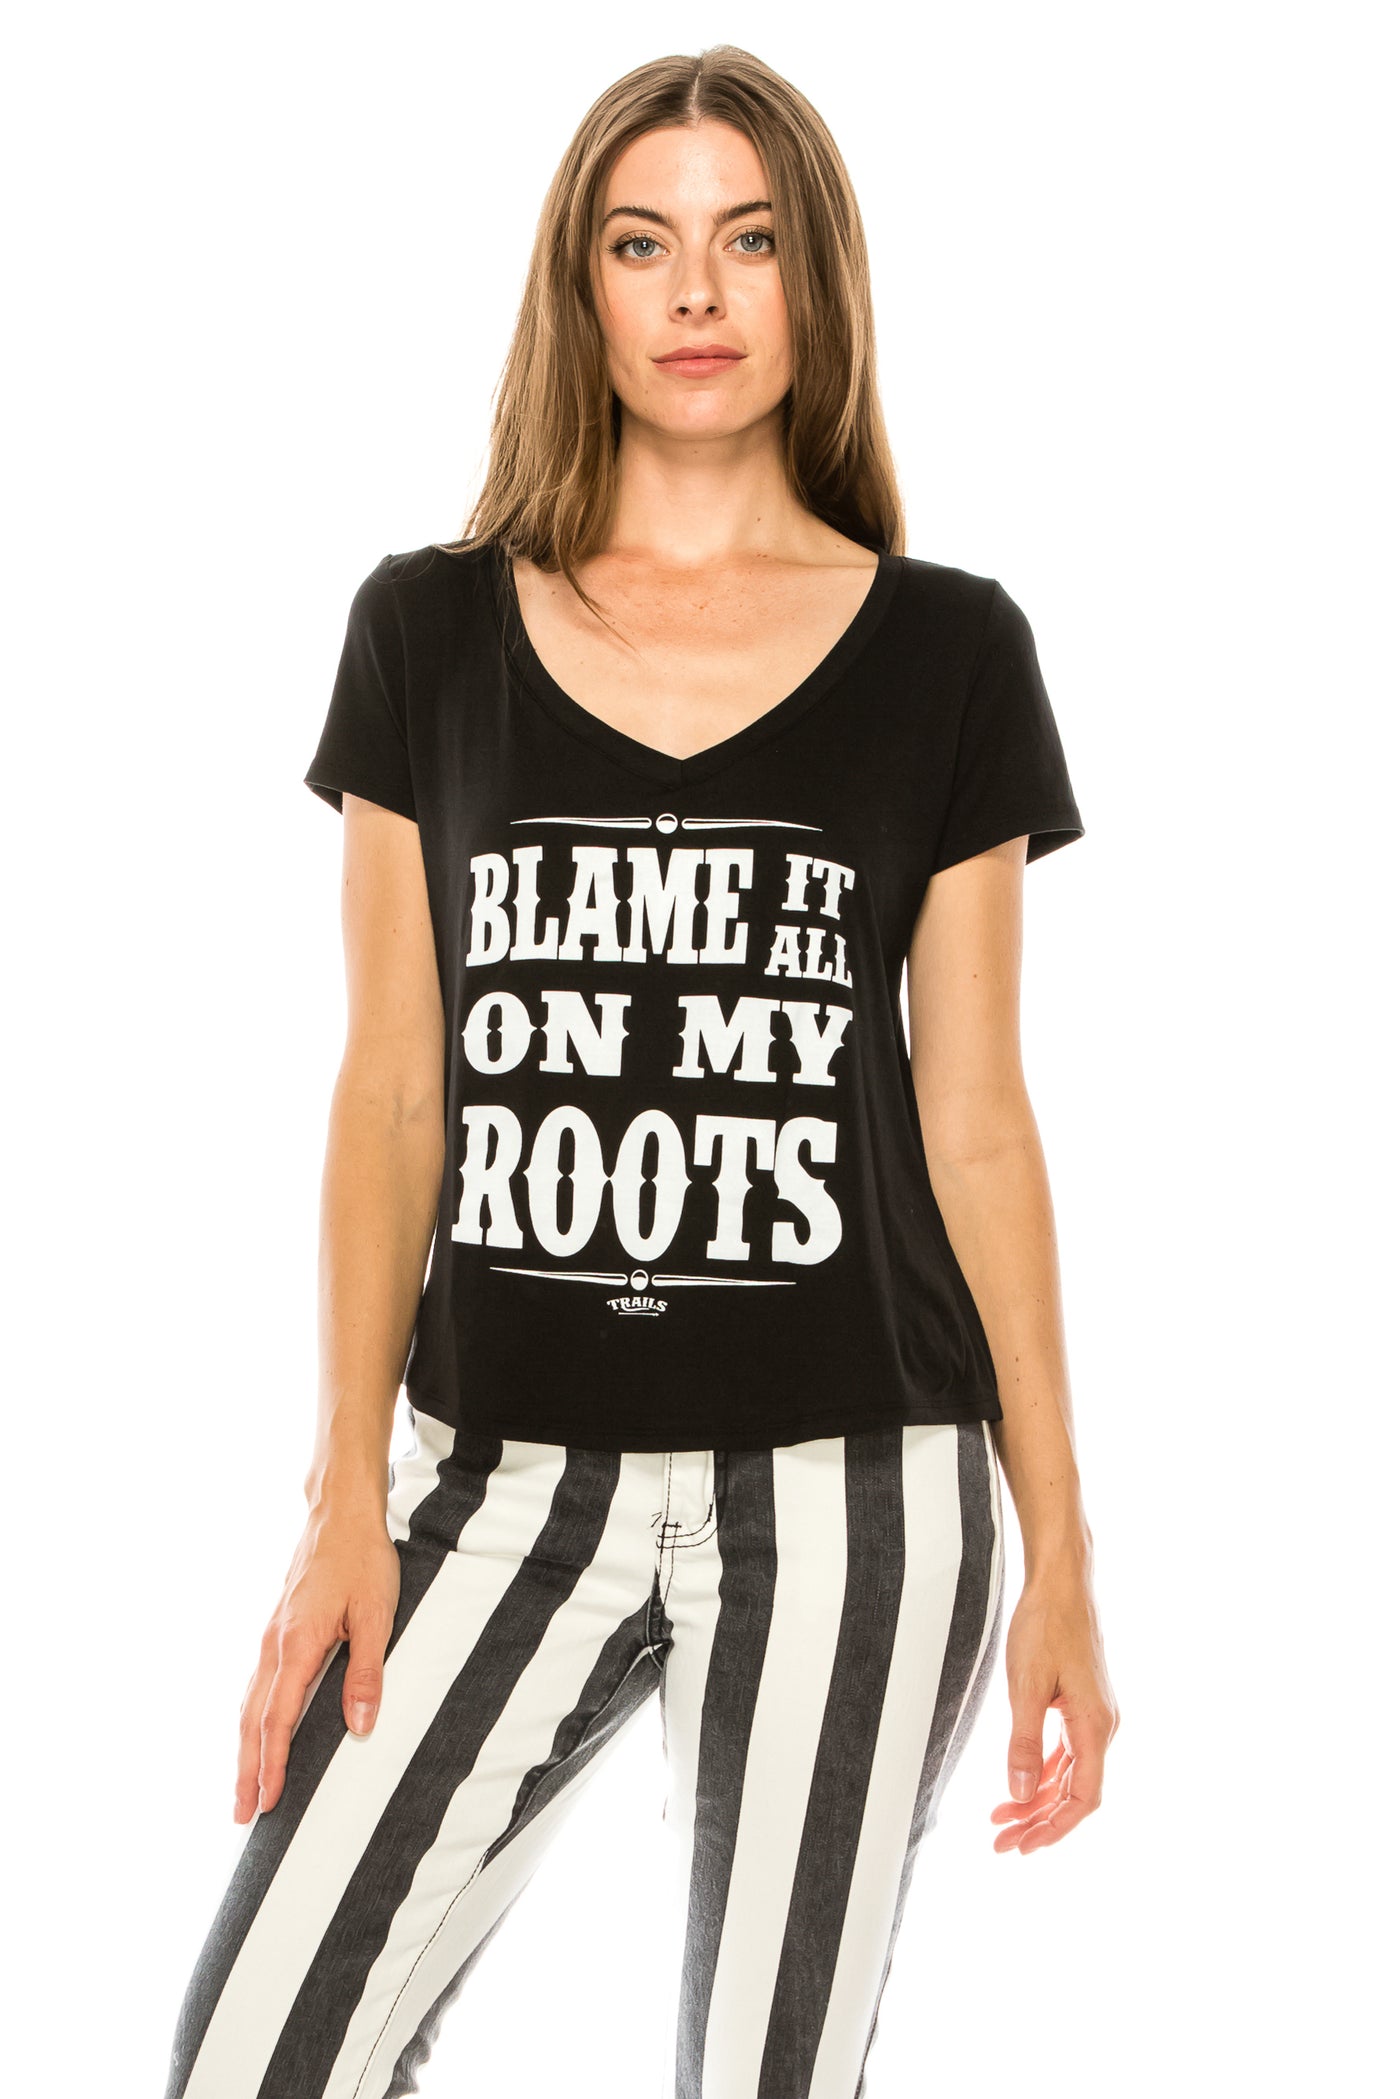 Blame it on my roots short sleeve shirt